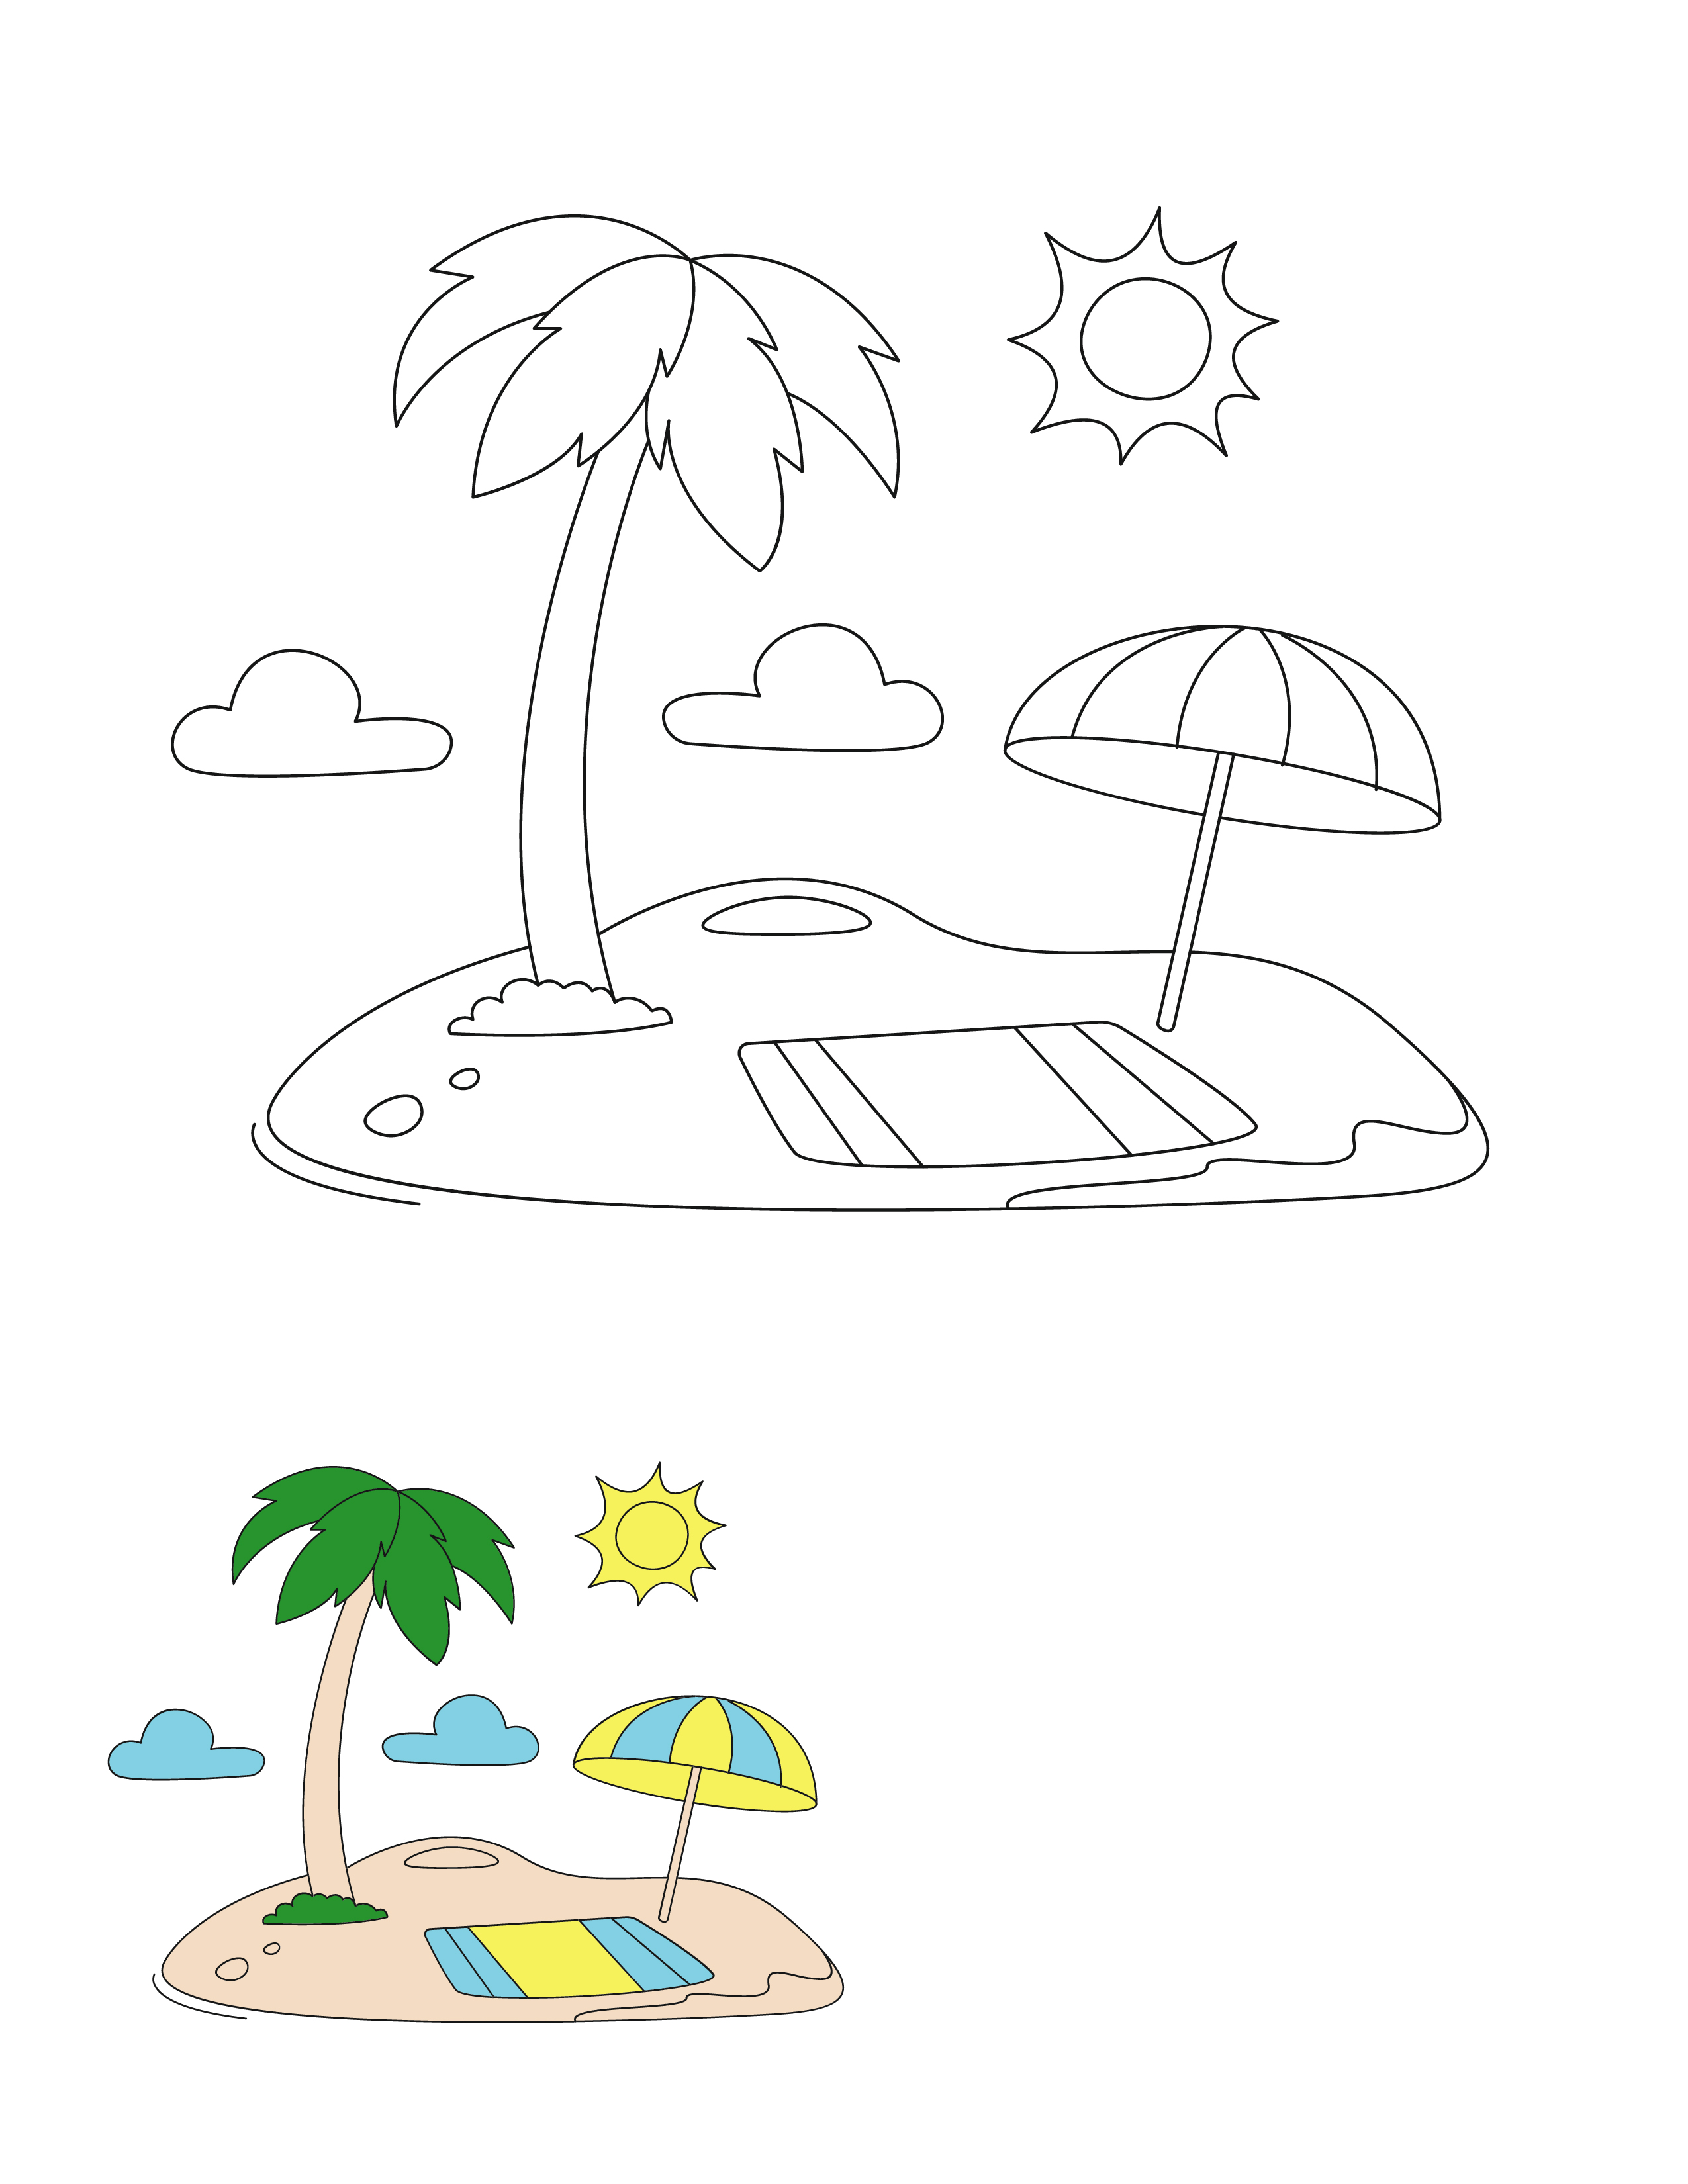 FREE Summer Coloring Pages - Printable Image Download in PDF | Template.net